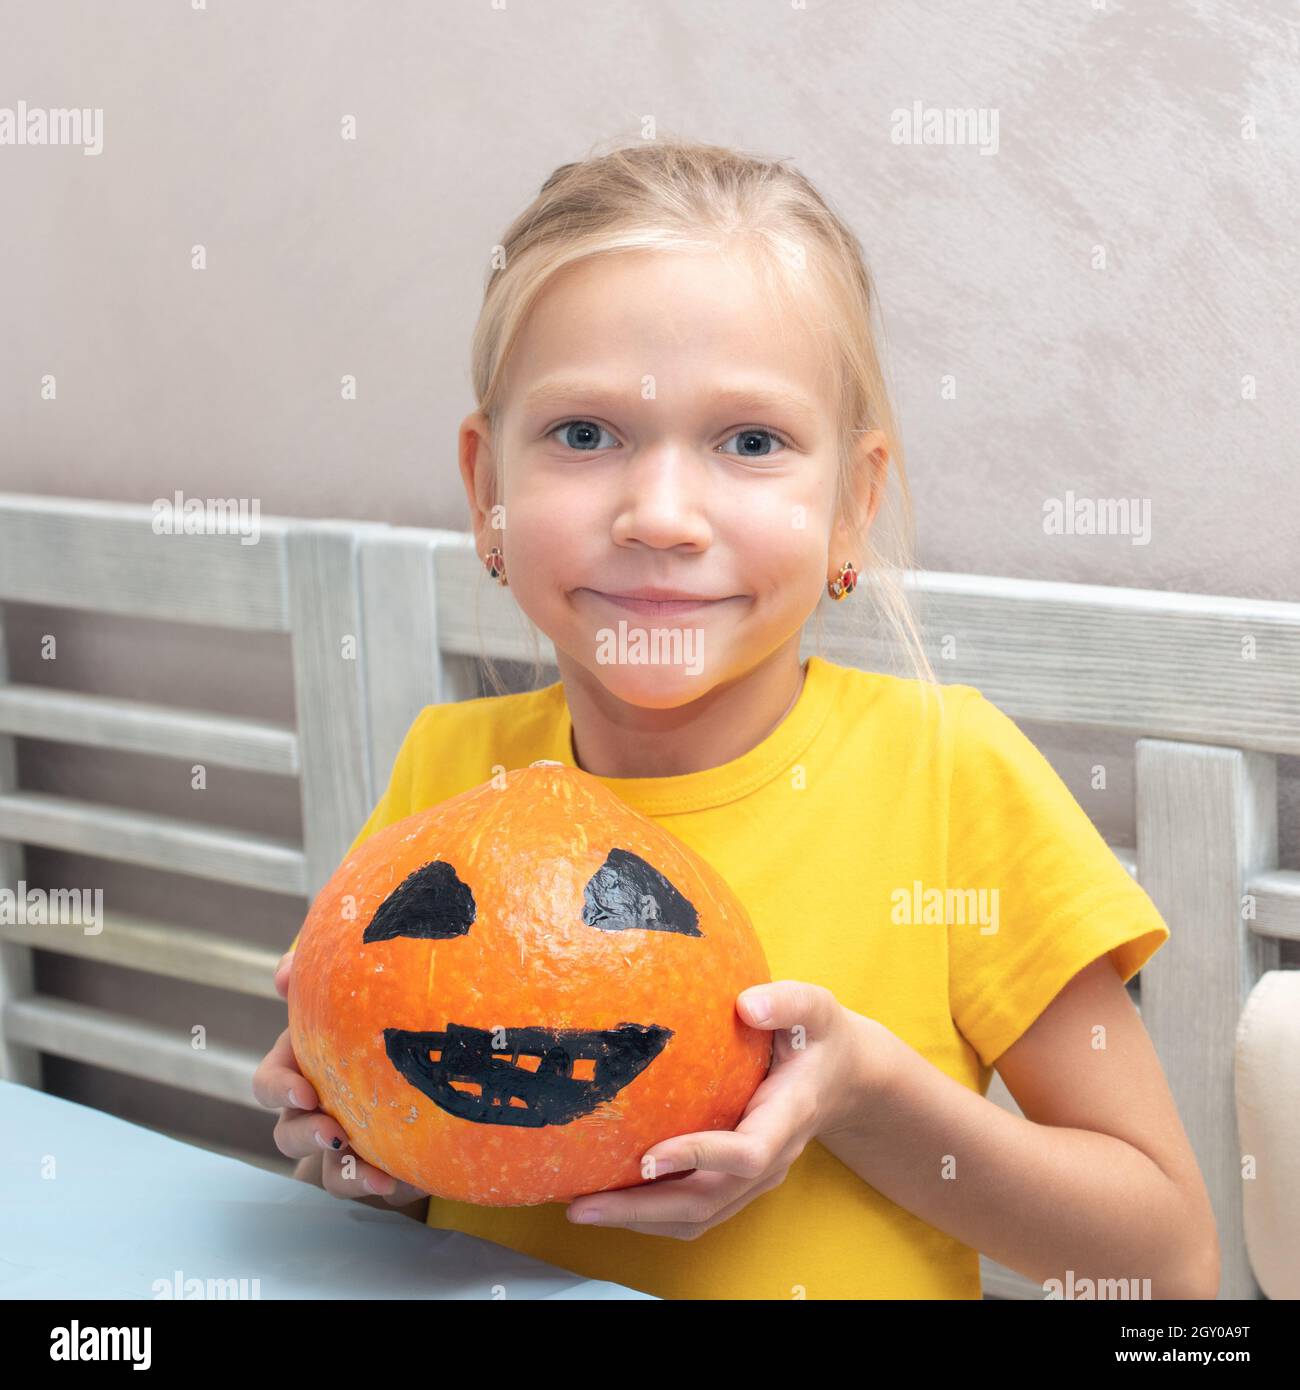 The girl shows a pumpkin with a painted scary face, creating a Halloween Jack Lantern. Halloween party and family lifestyle background Stock Photo